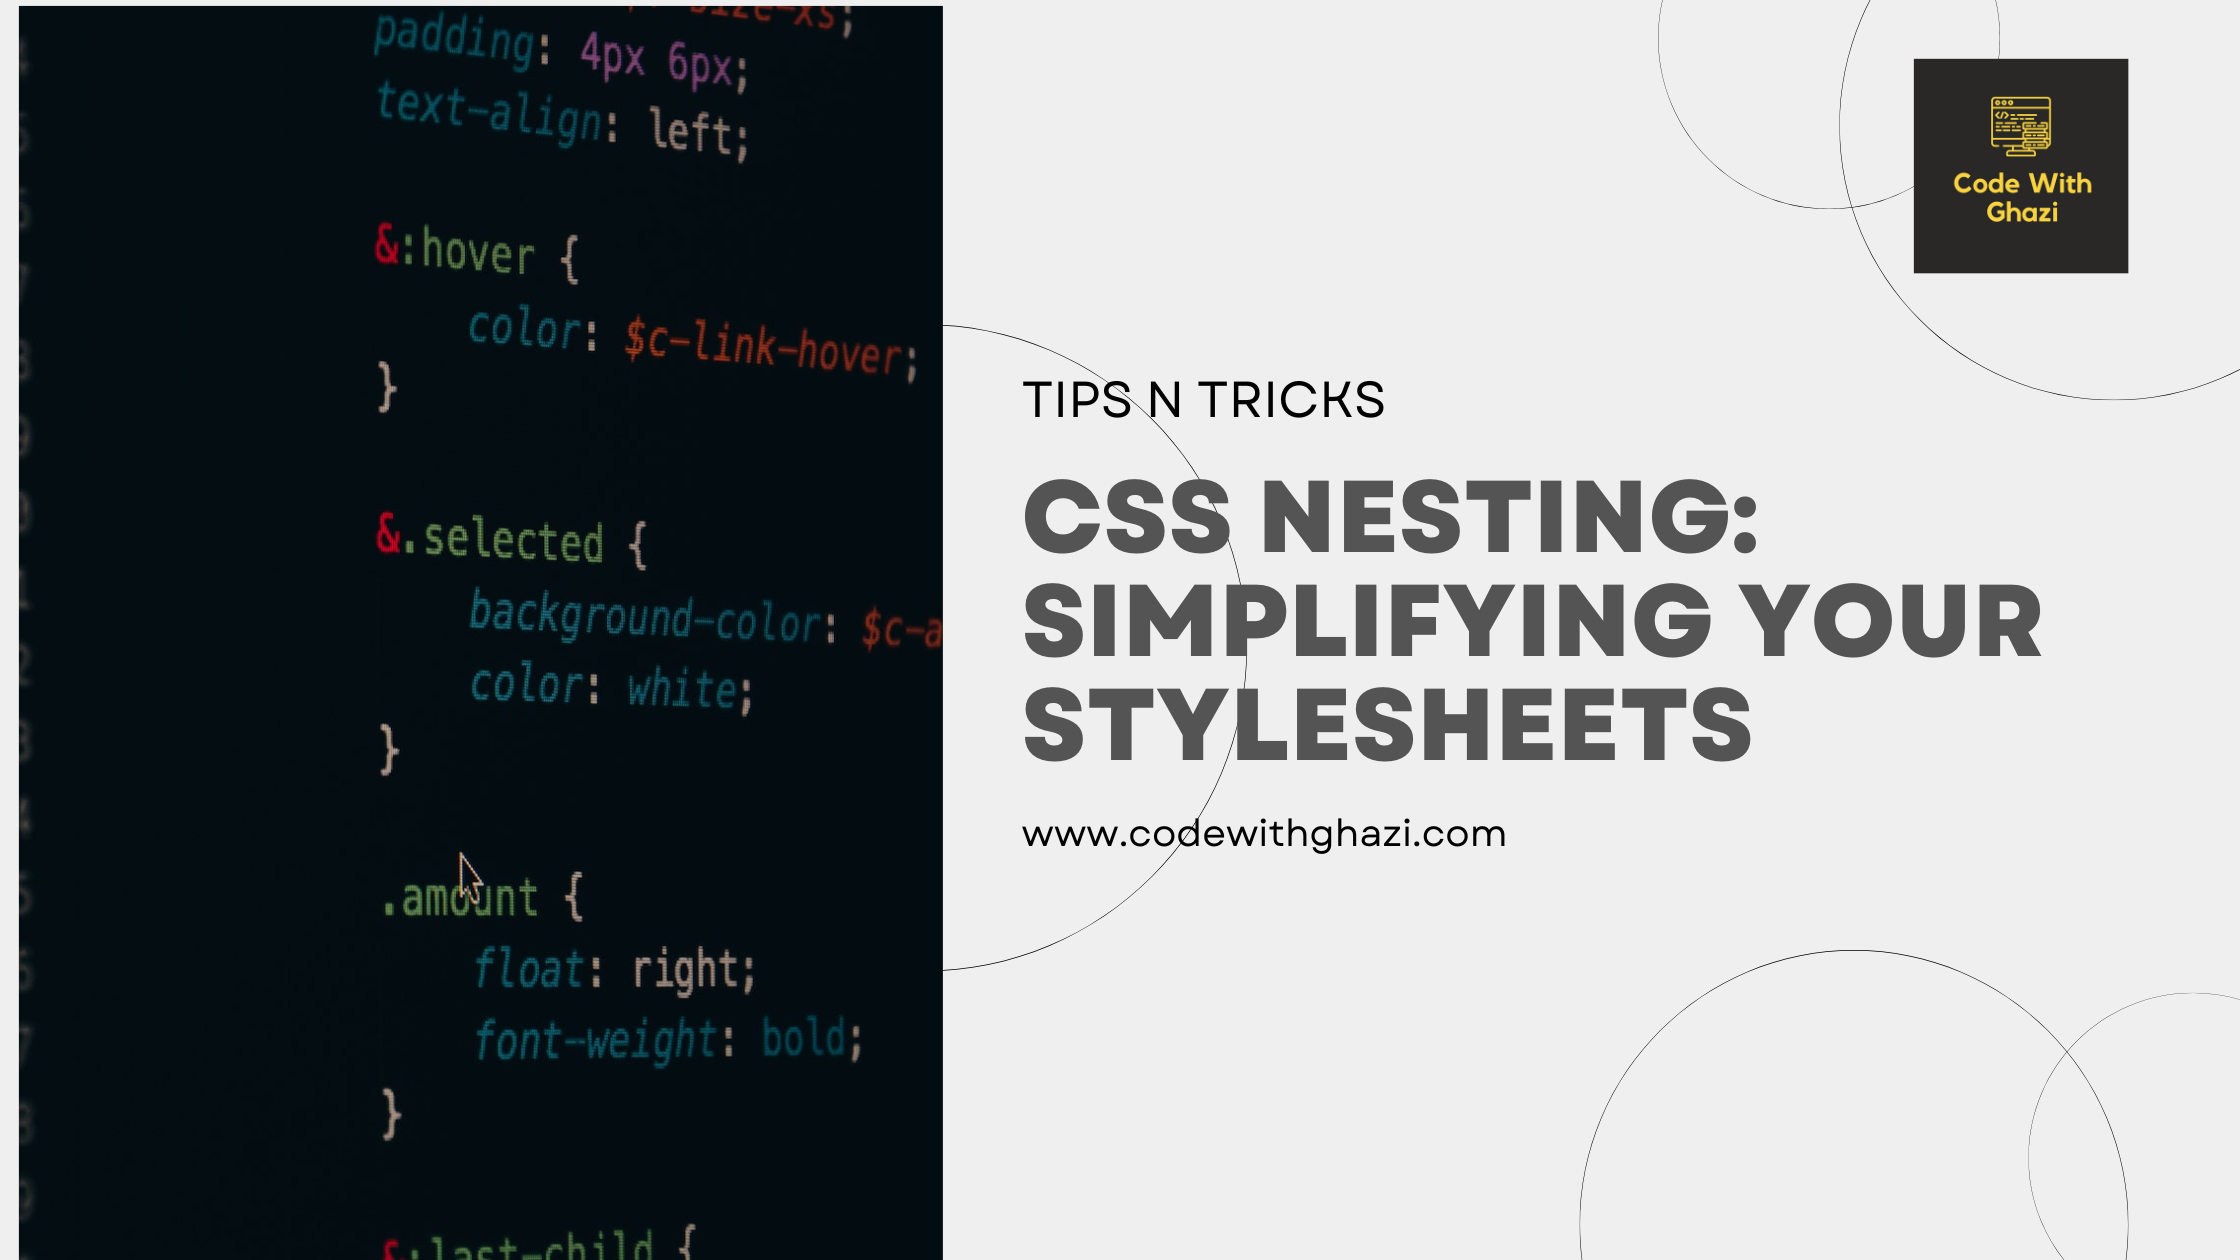 CSS Nesting: Simplifying your Stylesheets